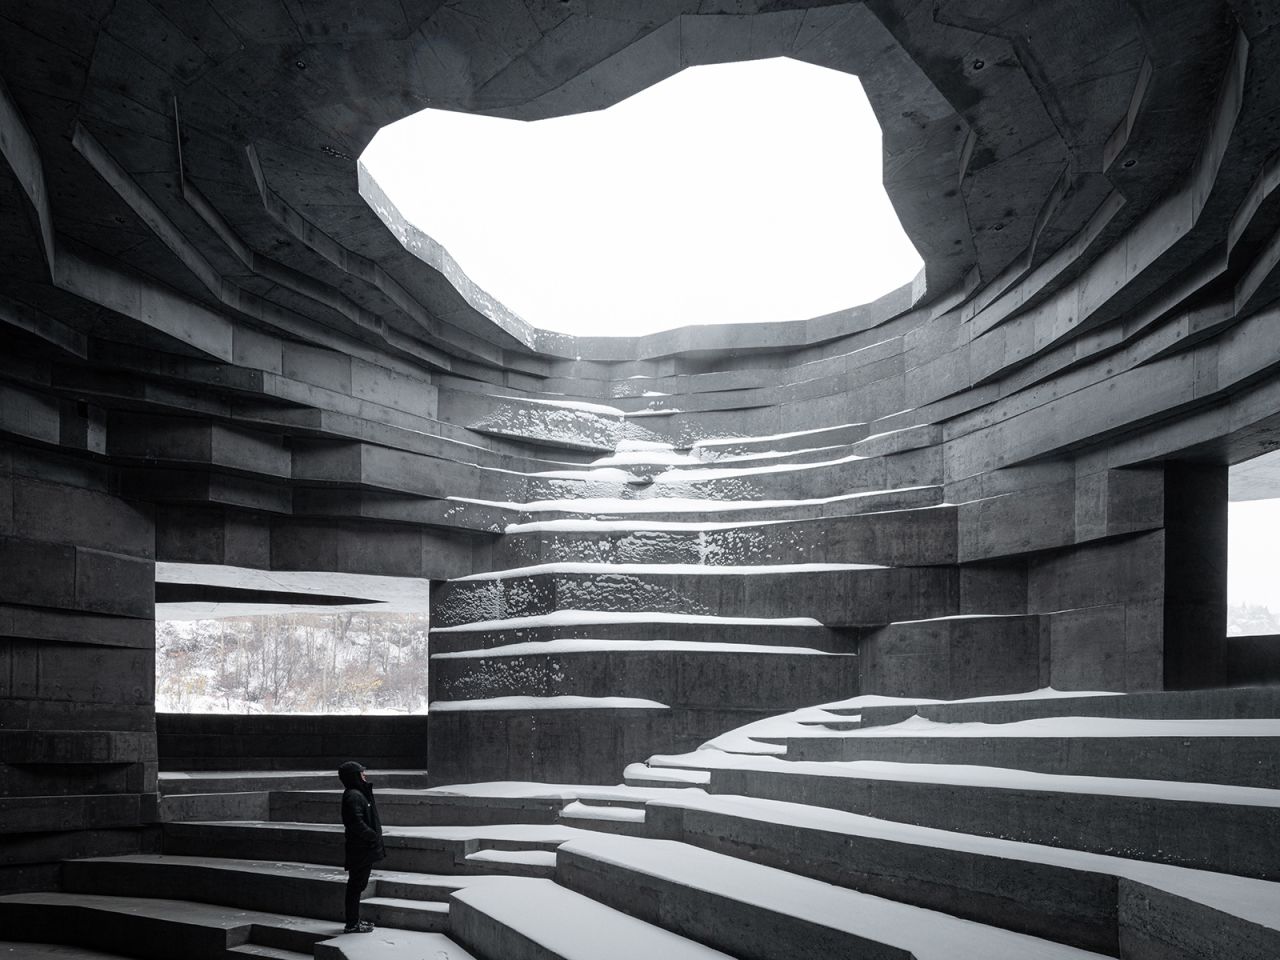 Photographer Hu Kangyu was recognized for his photograph of Open Architecture's Chapel of Sound, an arts venue near the Great Wall of China.